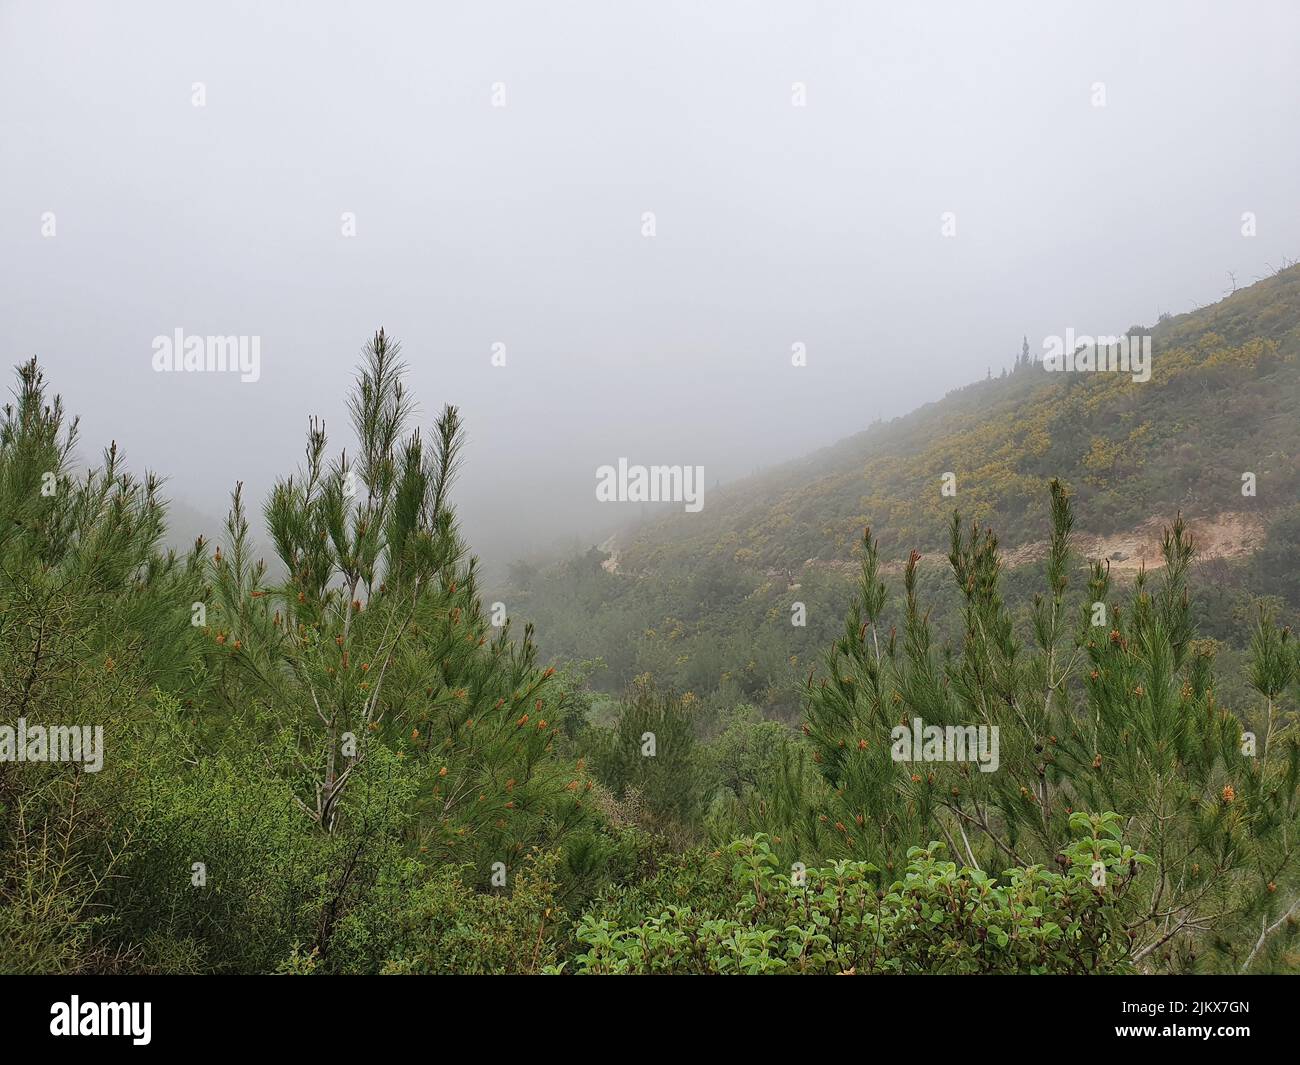 A beautiful view of green trees on a misty day Stock Photo